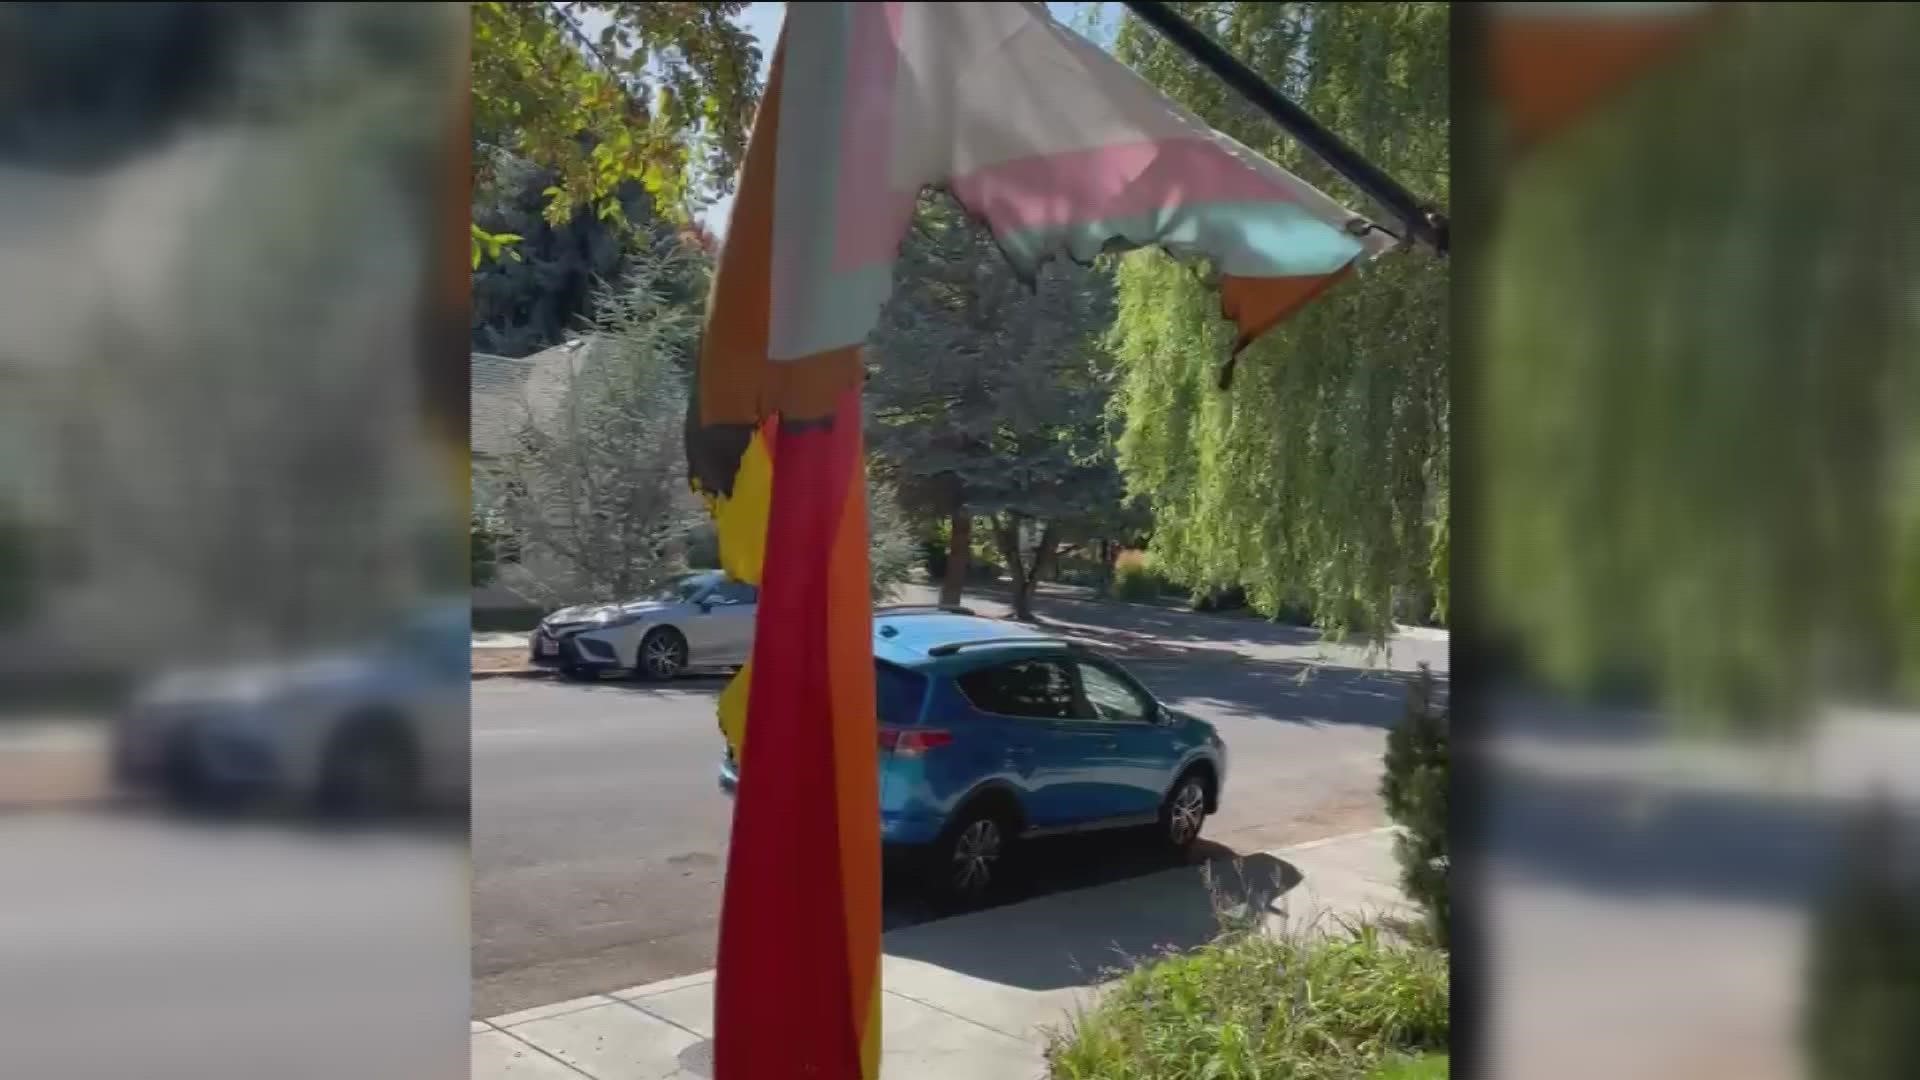 "A neighbor down the way had a progress flag stolen. It feels like it's escalating. The burning of the flag feels like it's pushing it forward into a scary moment."